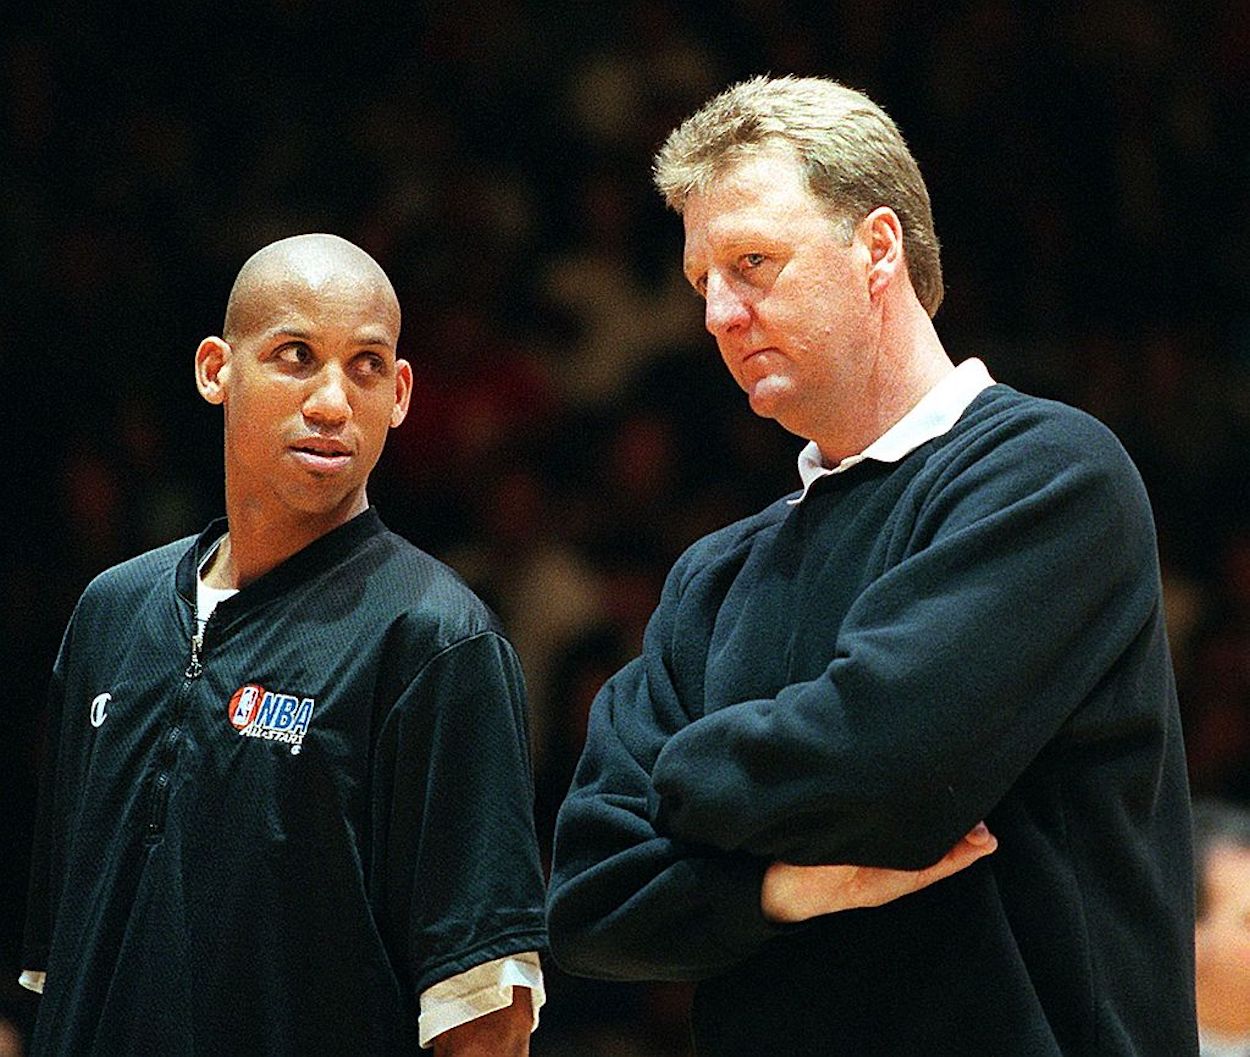 Larry Bird (R) and Reggie Miller (L) stand together during the 1997-98 NBA season.